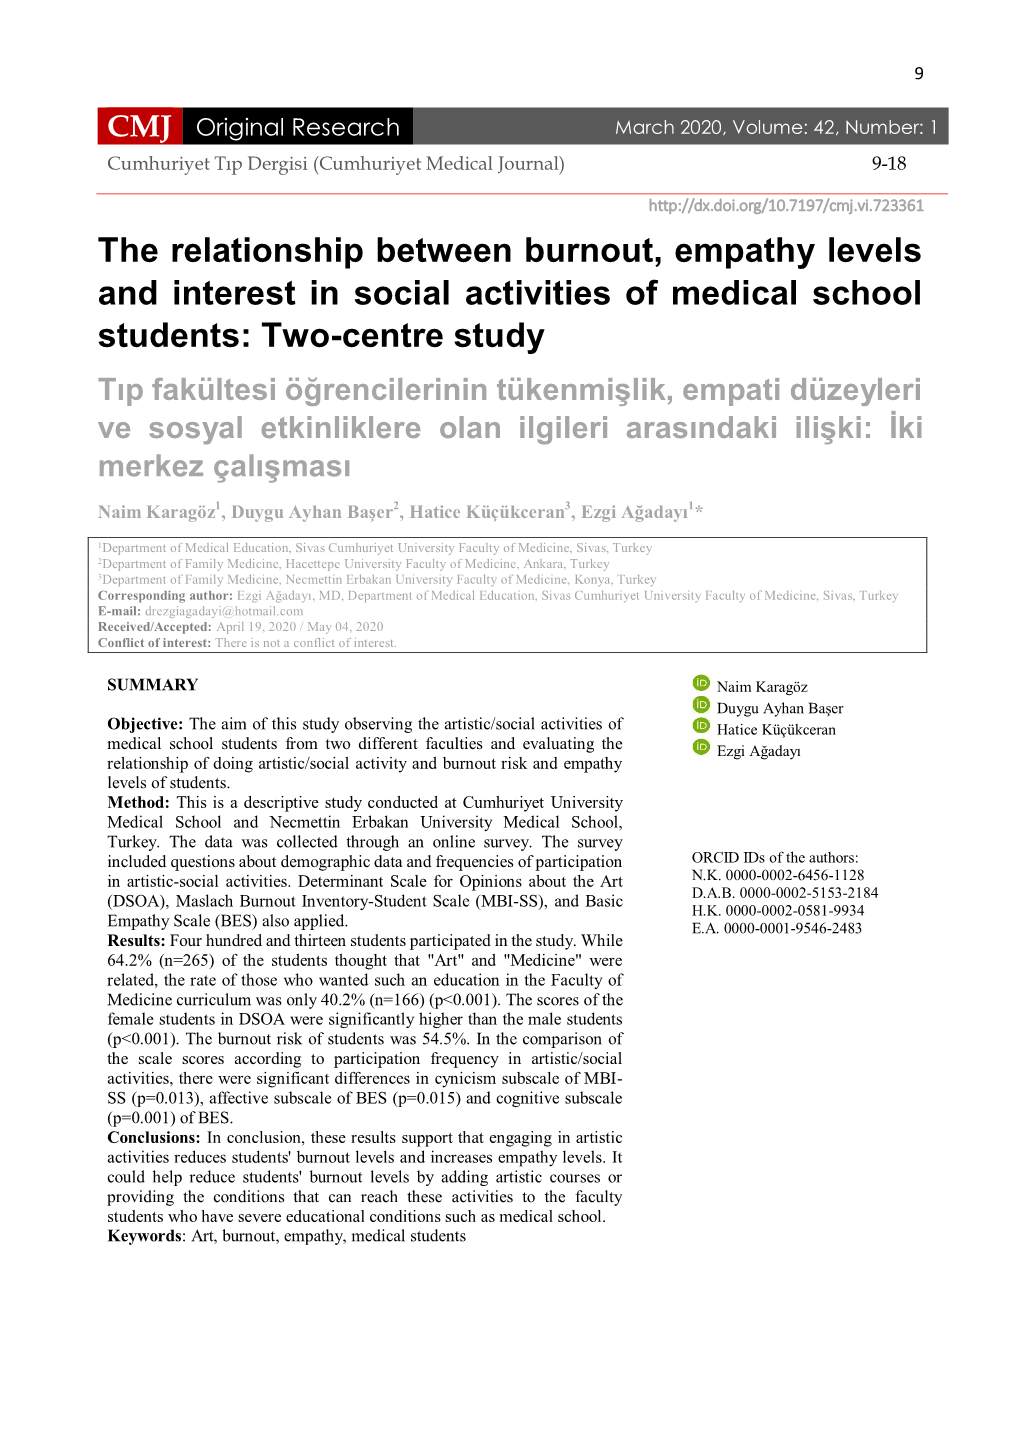 The Relationship Between Burnout, Empathy Levels and Interest in Social Activities of Medical School Students